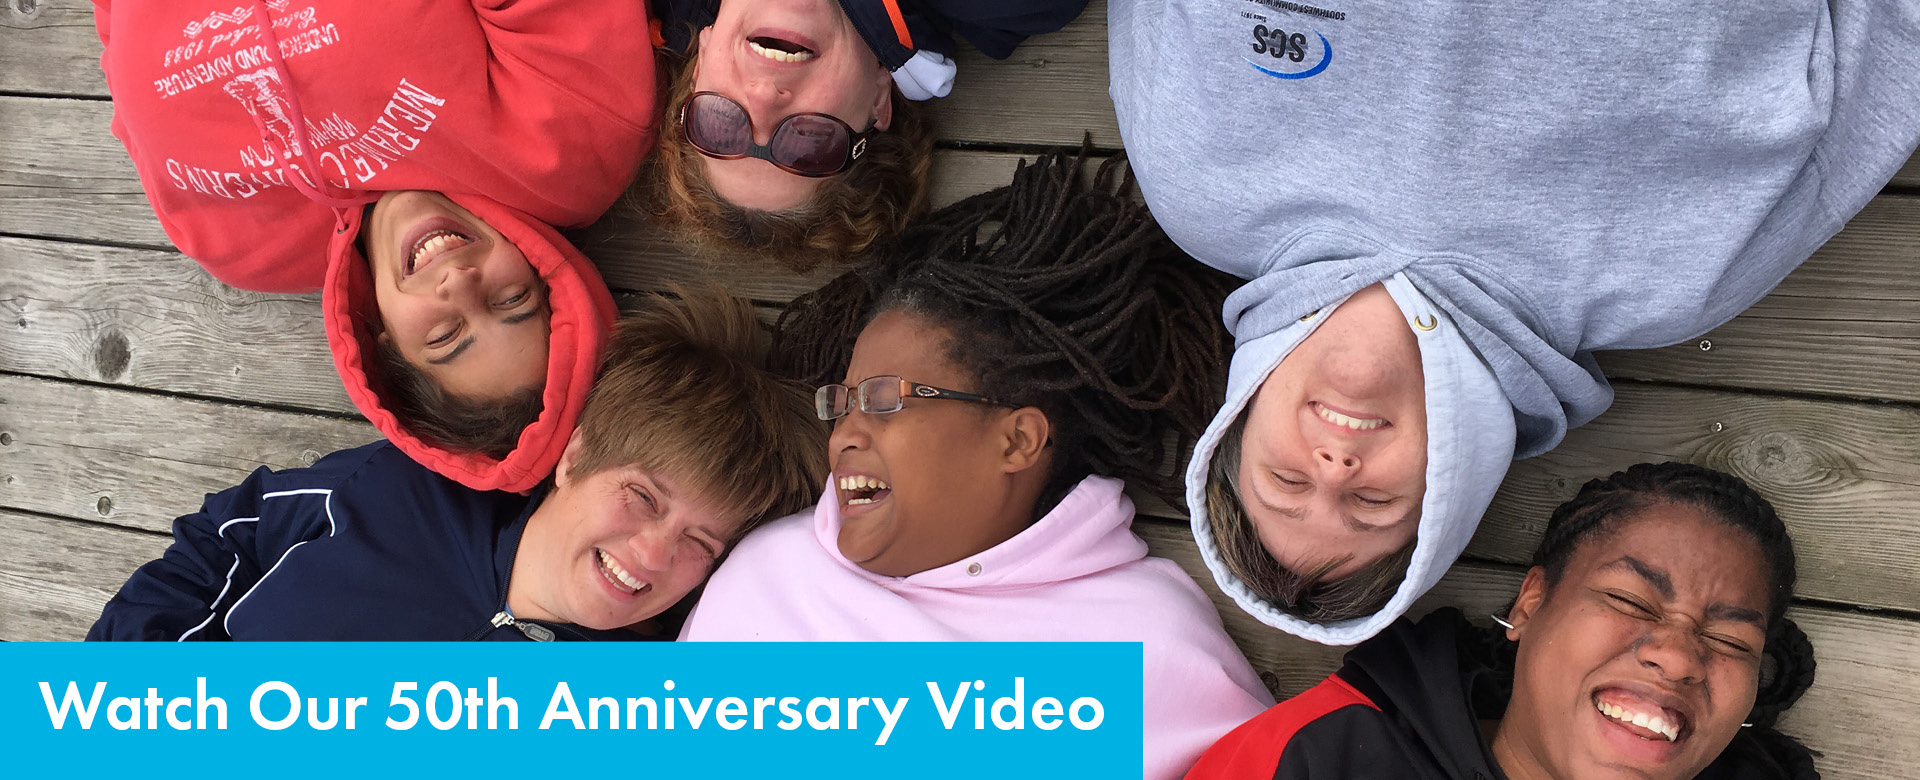 Overhead shot of 6 SSSRA participants laying on deck, laughing together. Text: Watch Our 50th Anniversary Video